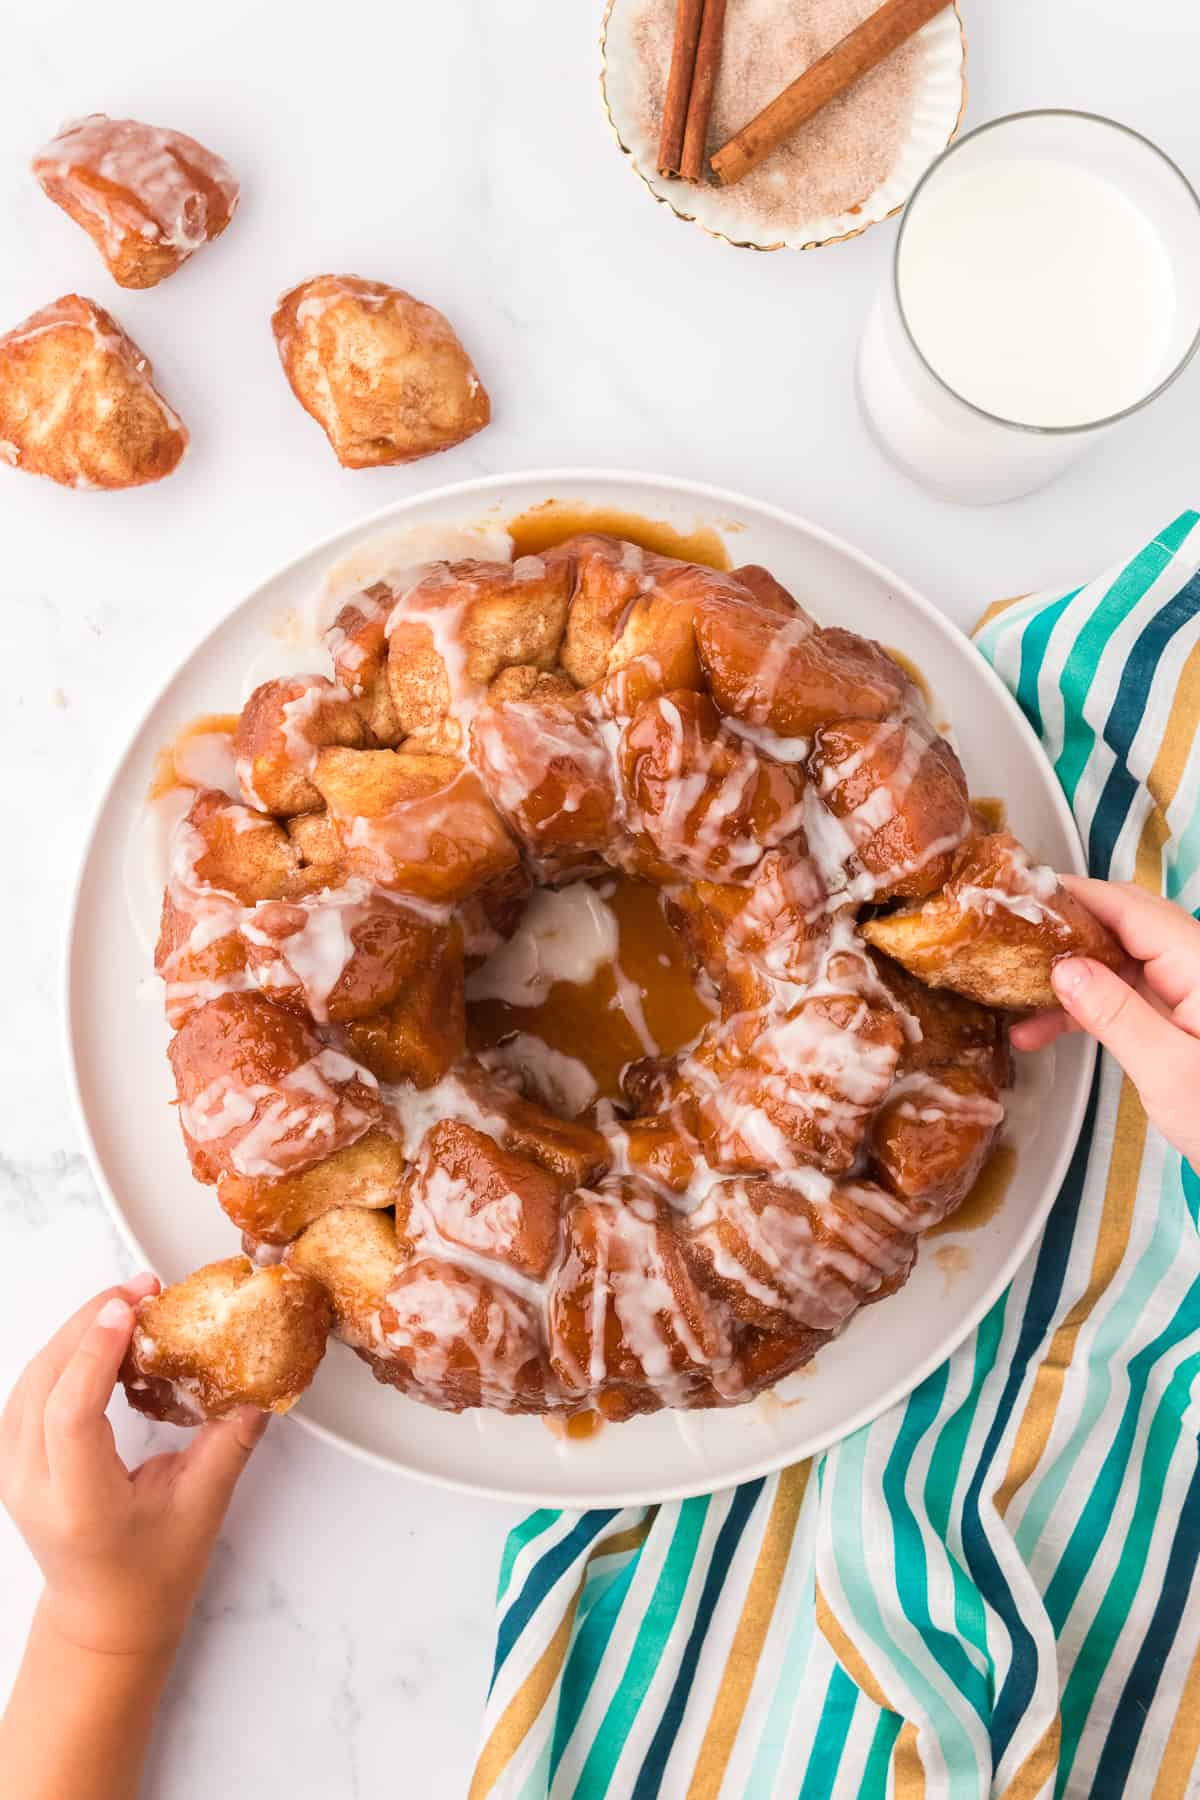 a white plate with monkey bread on it with two small hands pulling pieces off the bread, a teal, gold and blue striped towel underneath and pieces of monkey bread, milk, cinnamon sugar and cinnamon sticks arranged around it